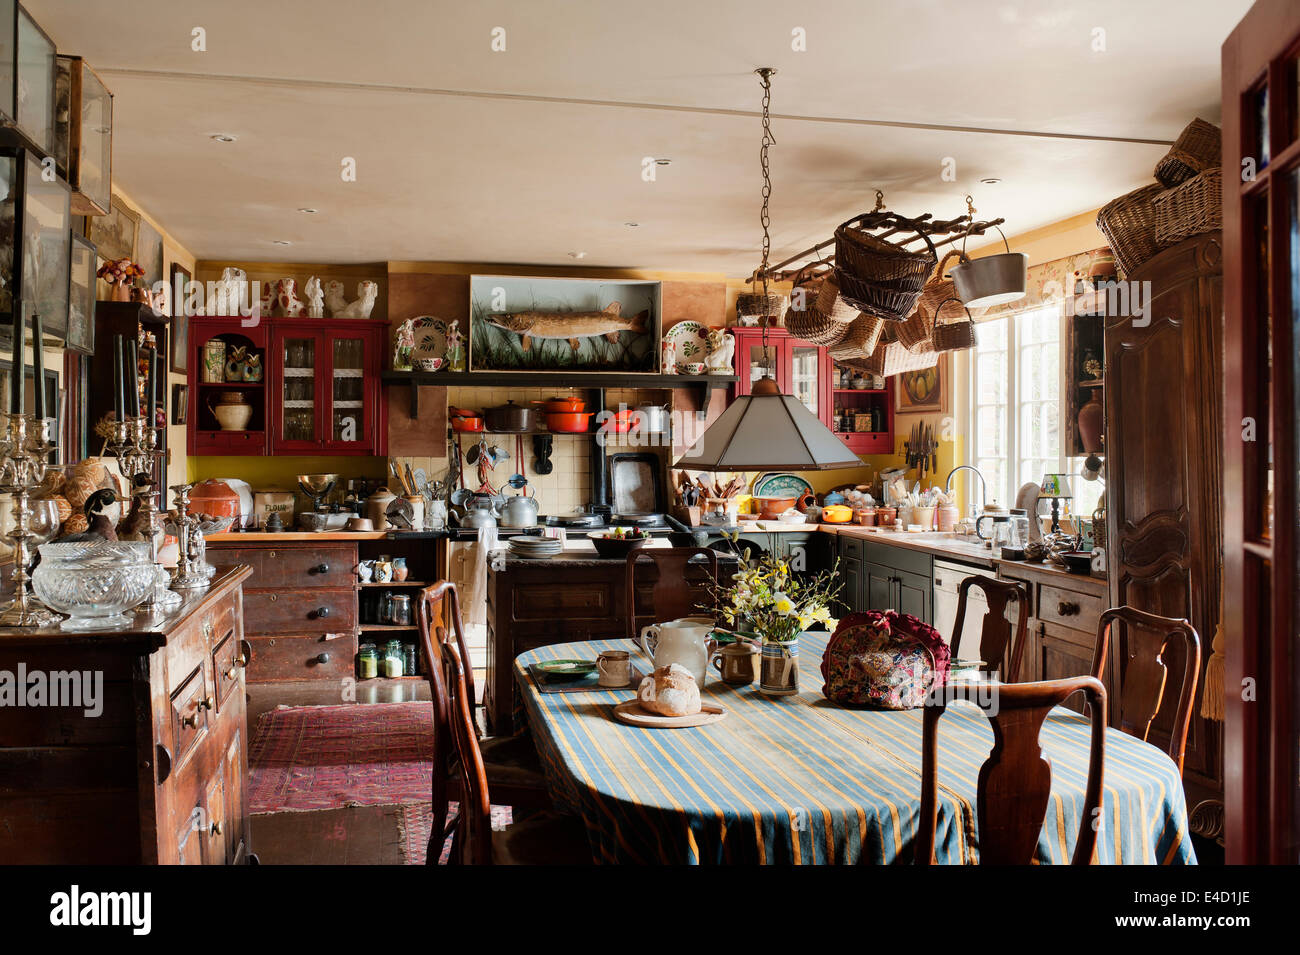 Charming country kitchen stuffed with antiques. Glass taxidermy cases line the walls and wicker baskets hang from the ceiling Stock Photo